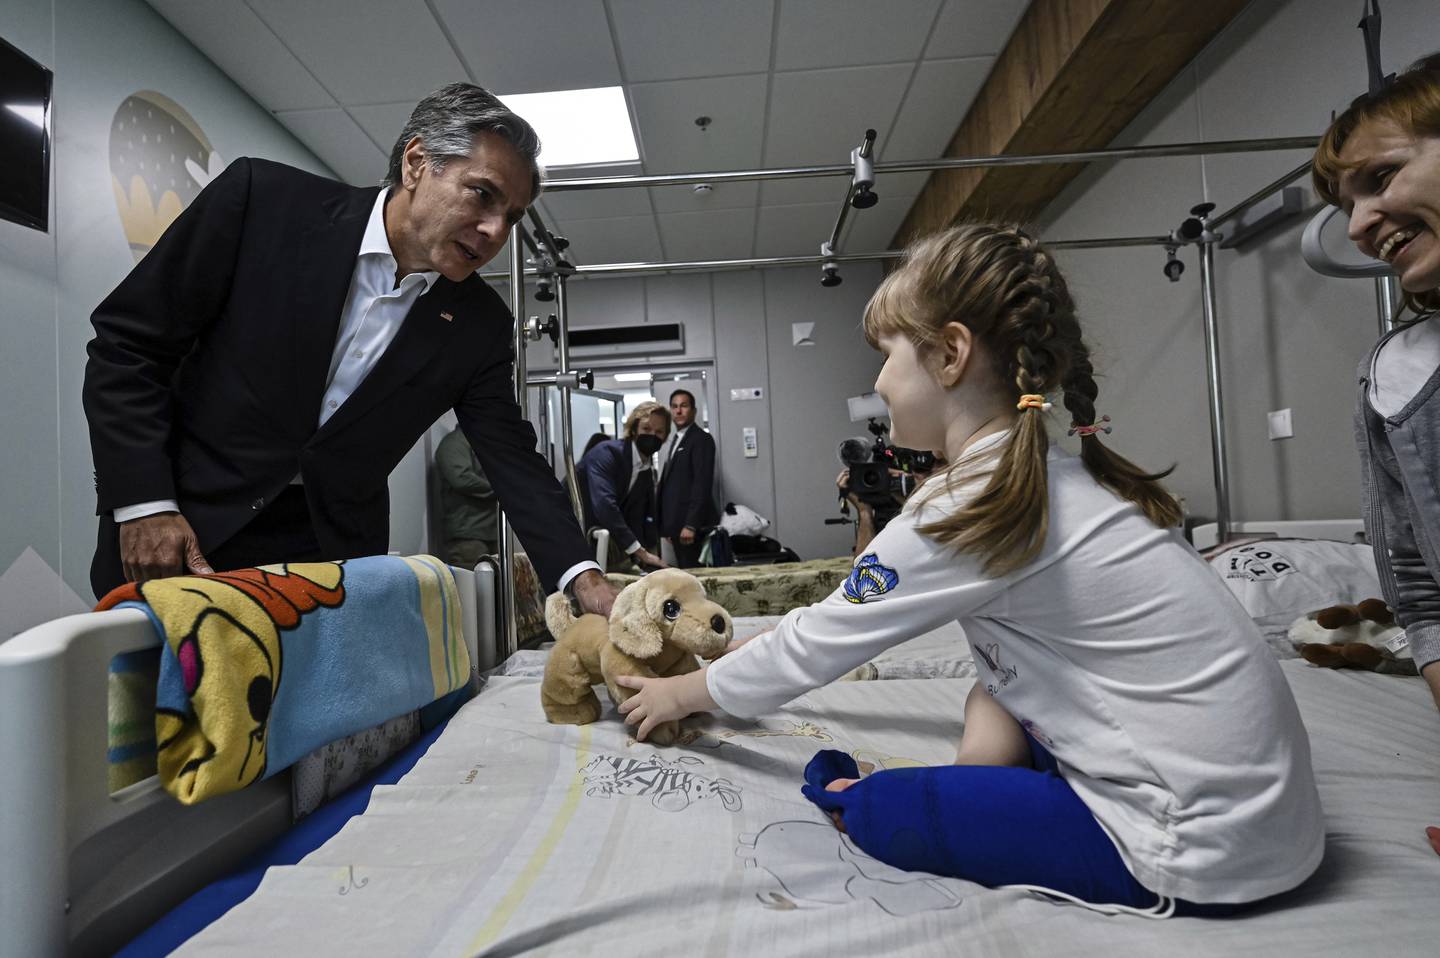 US Secretary of State Antony Blinken gives a gift to Marina, 6, from the Kherson region, during a visit to a children's hospital in Kyiv, Ukraine. AP